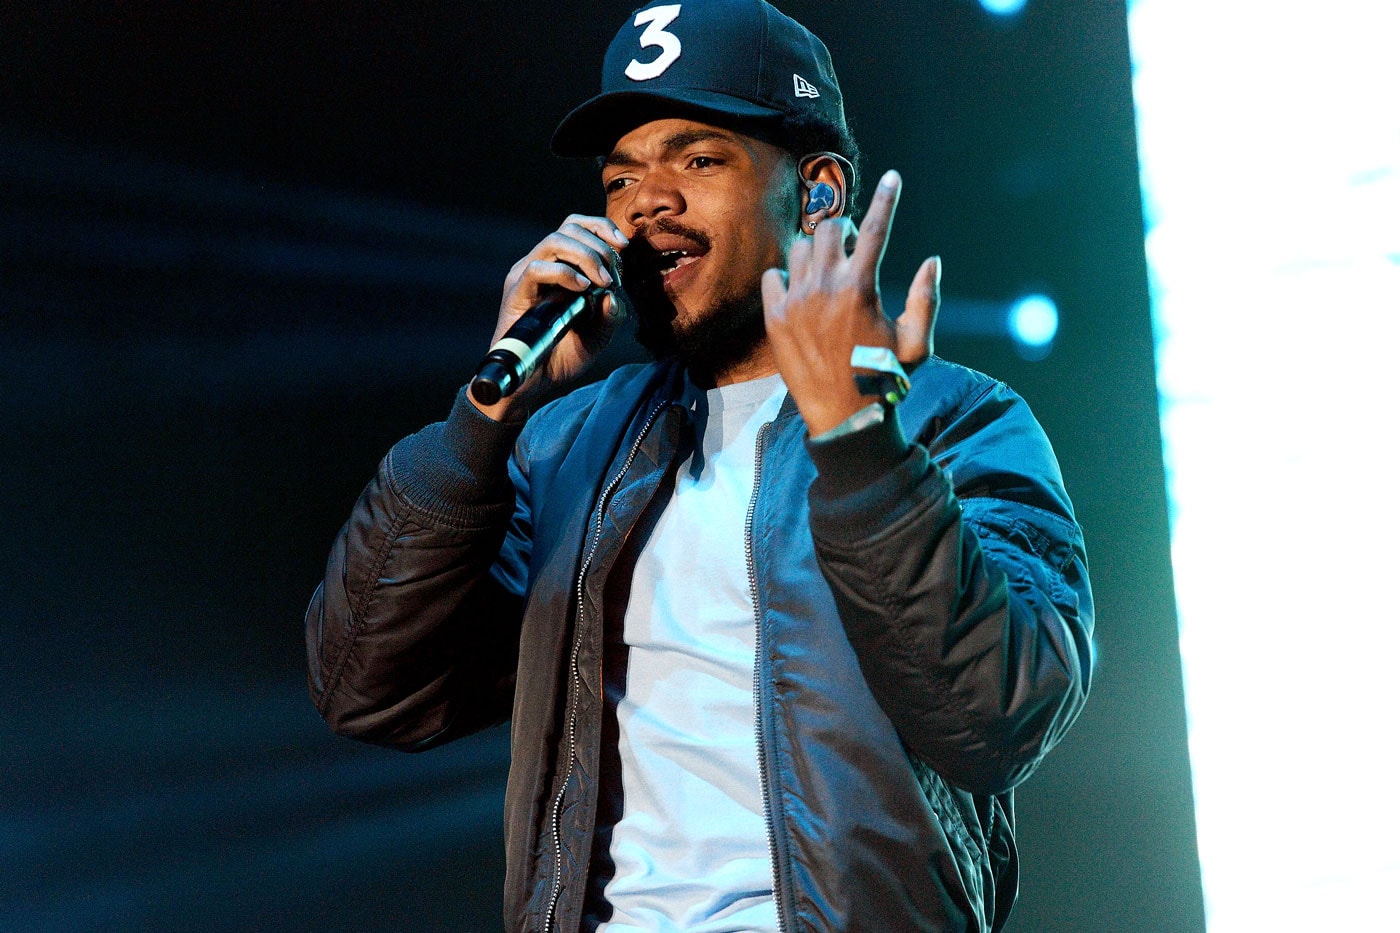 Chance The Rapper Reveals The U.S. Presidential Candidate He's Voting For, Hillary Clinton